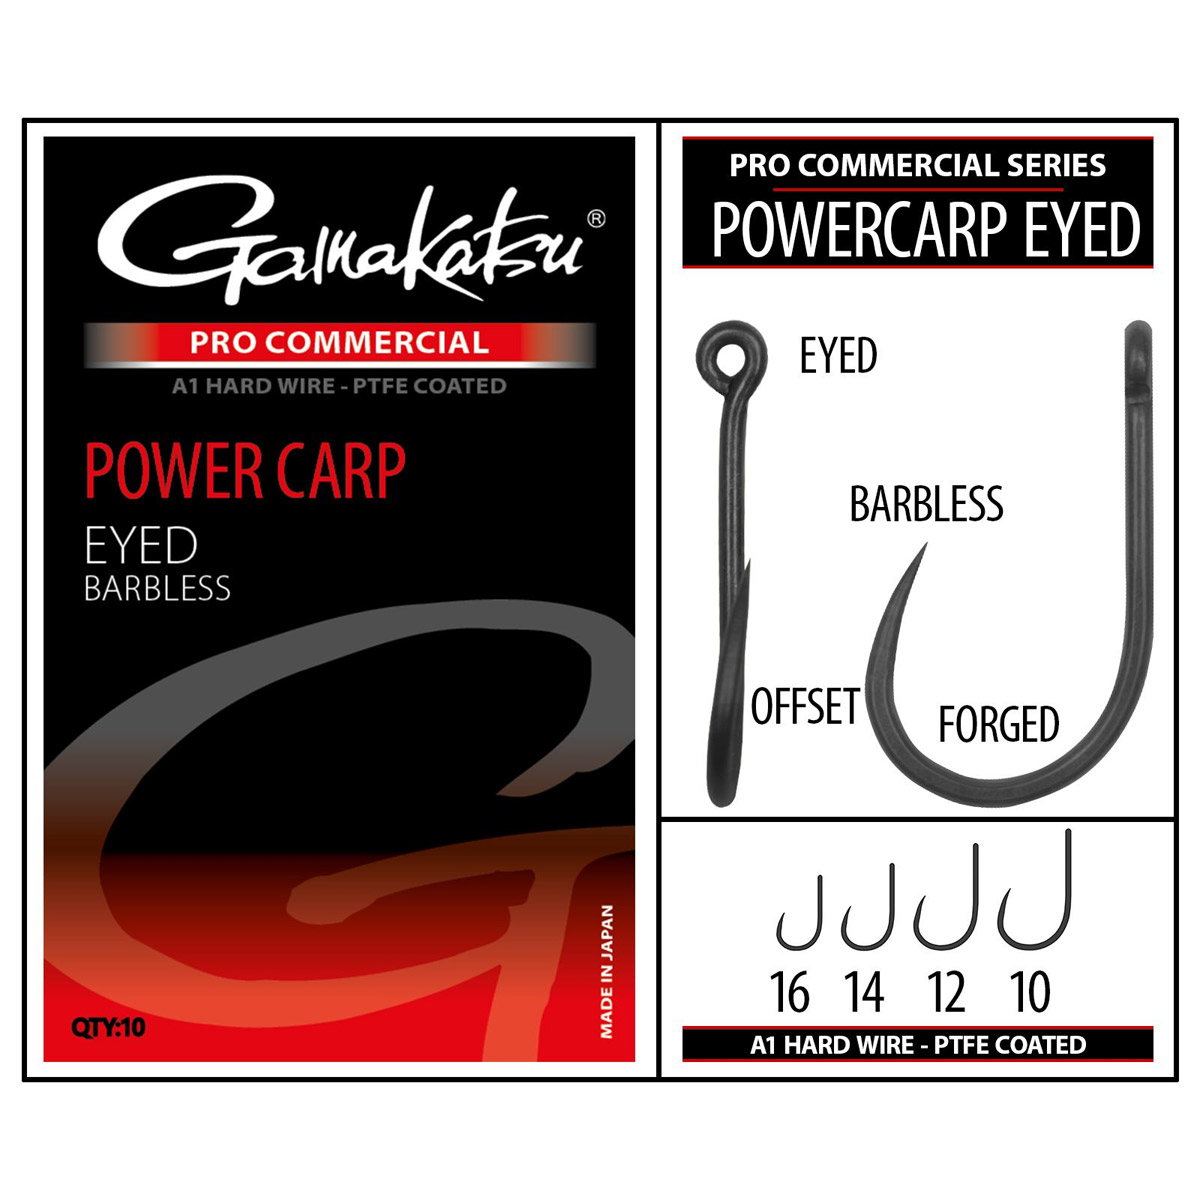 Gamakatsu Pro Commercial Power Carp A1 Eyed Barbless